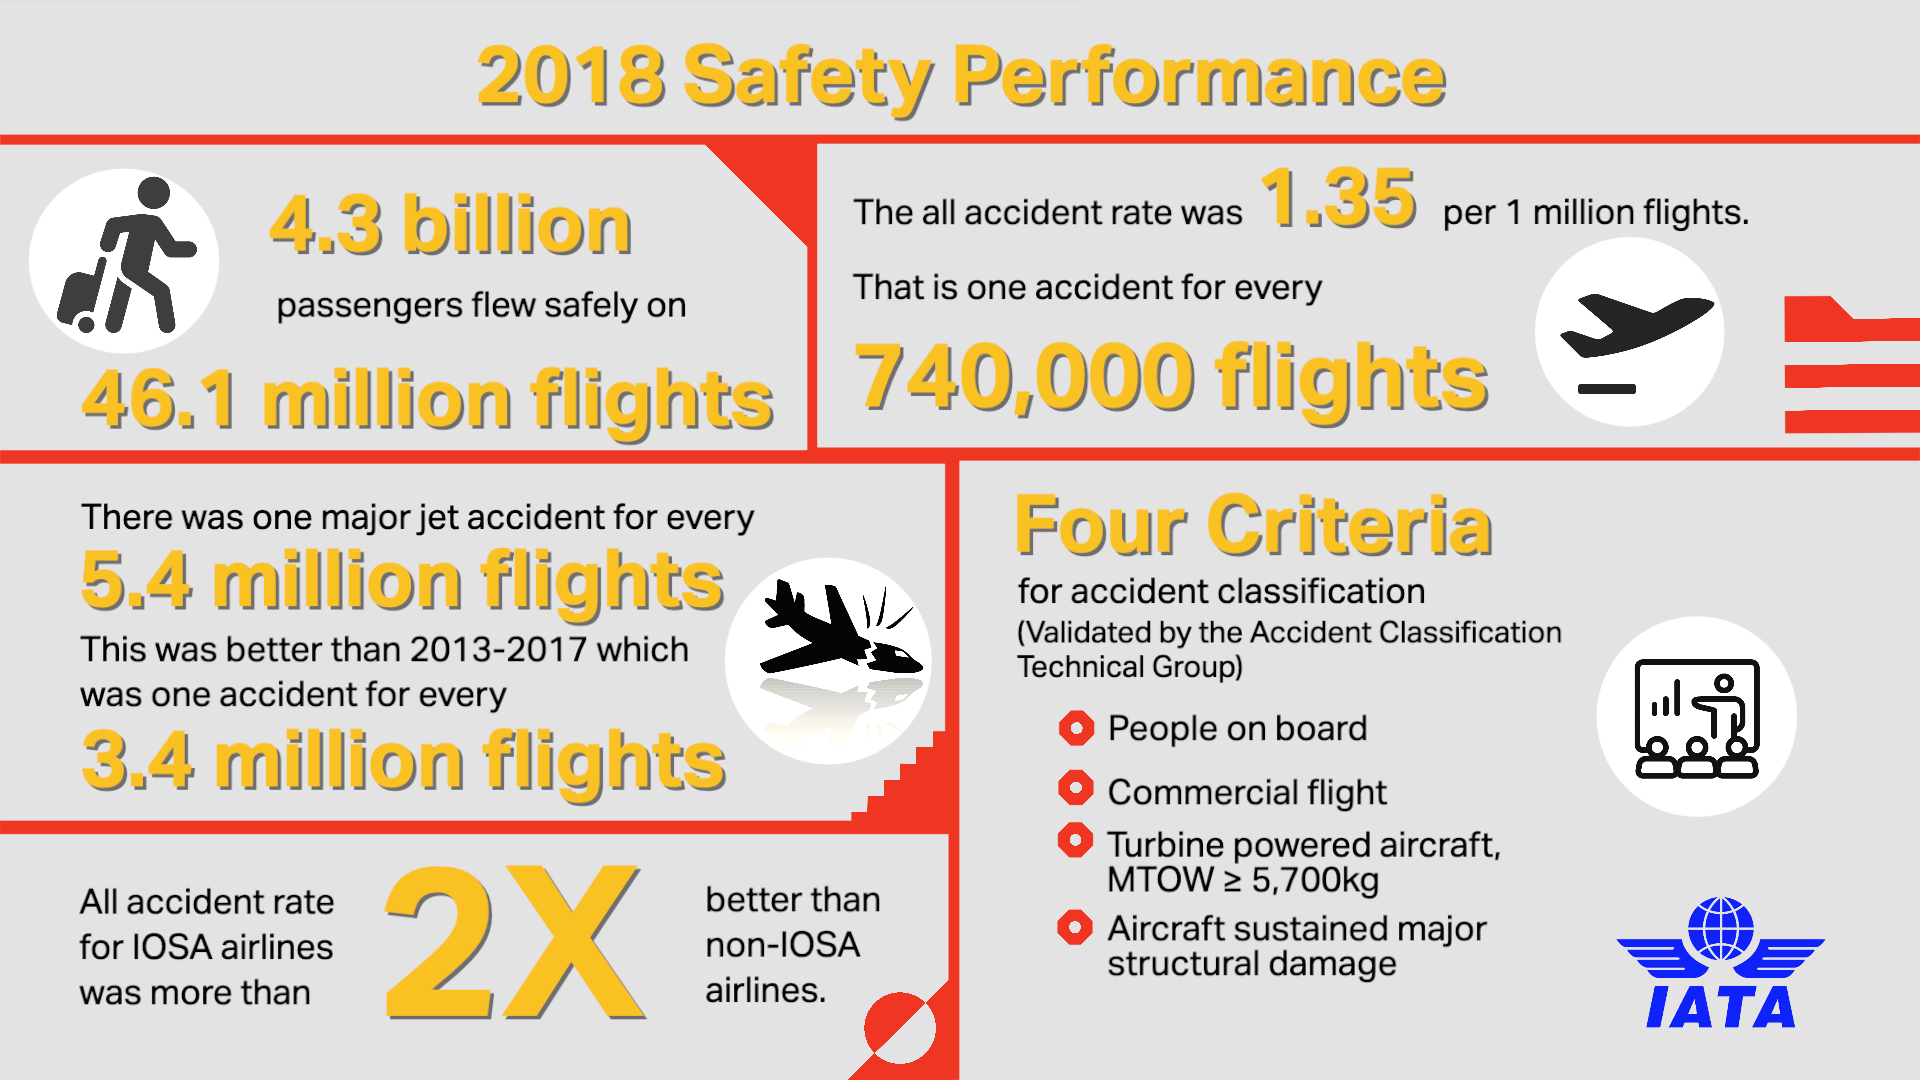 <p>IATA's CEO confirms the safety of flying: "Statistically, a passenger would have to fly every day for 241 years before getting into an accident with at least one fatality on board."</p> <p>Picture: IATA</p>